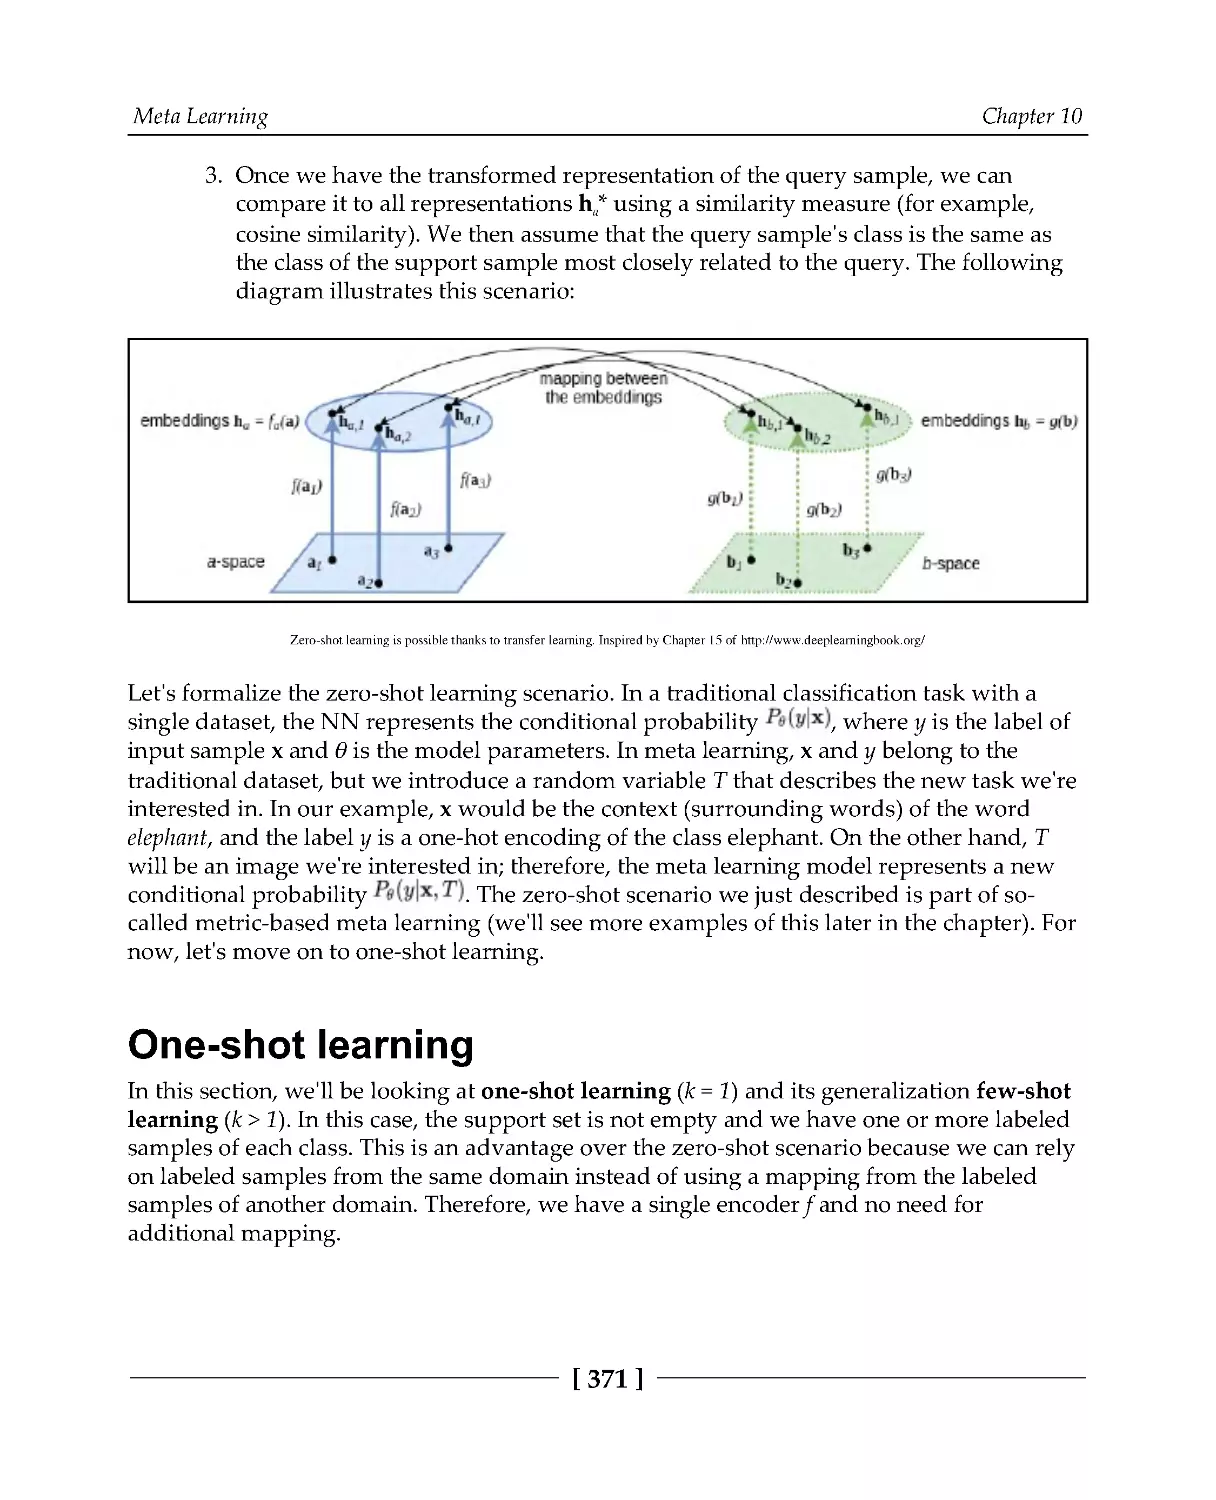 One-shot learning